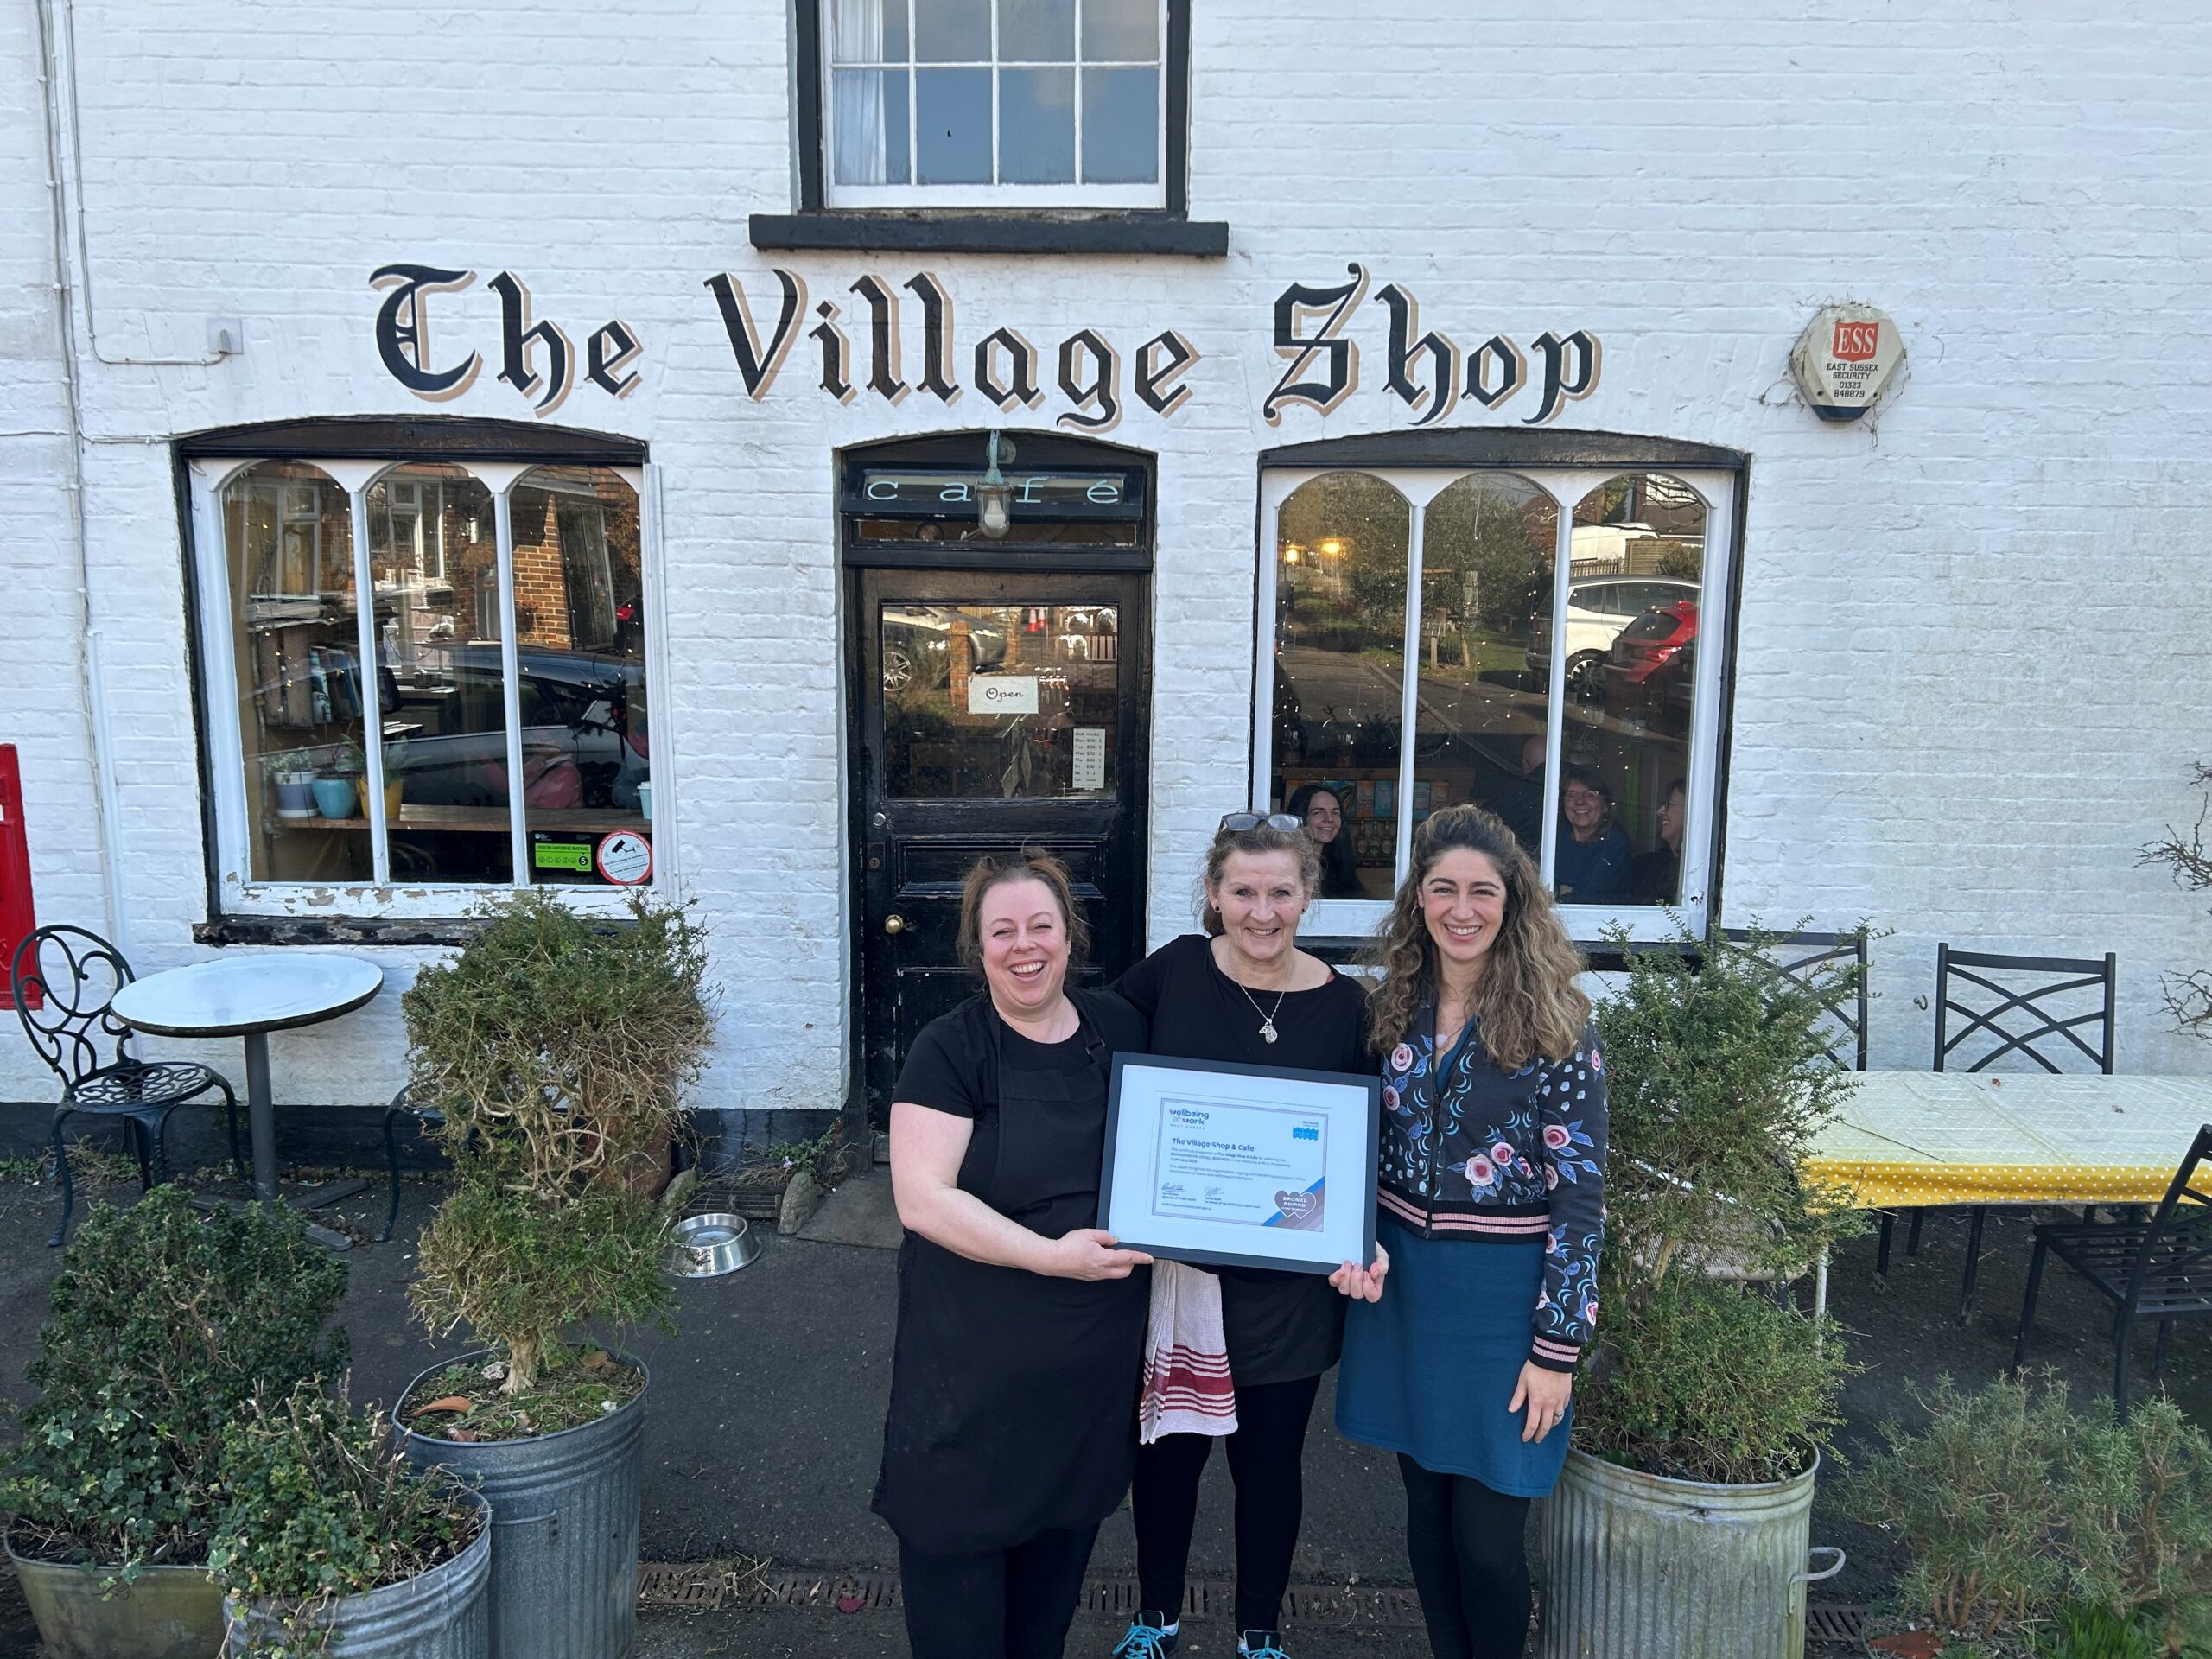 Left to Right: The Village Shop’s Tess Flower (director) and Jo Robinson-Sivyer (manager), and ESCC’s Flavia de Melo Dewey